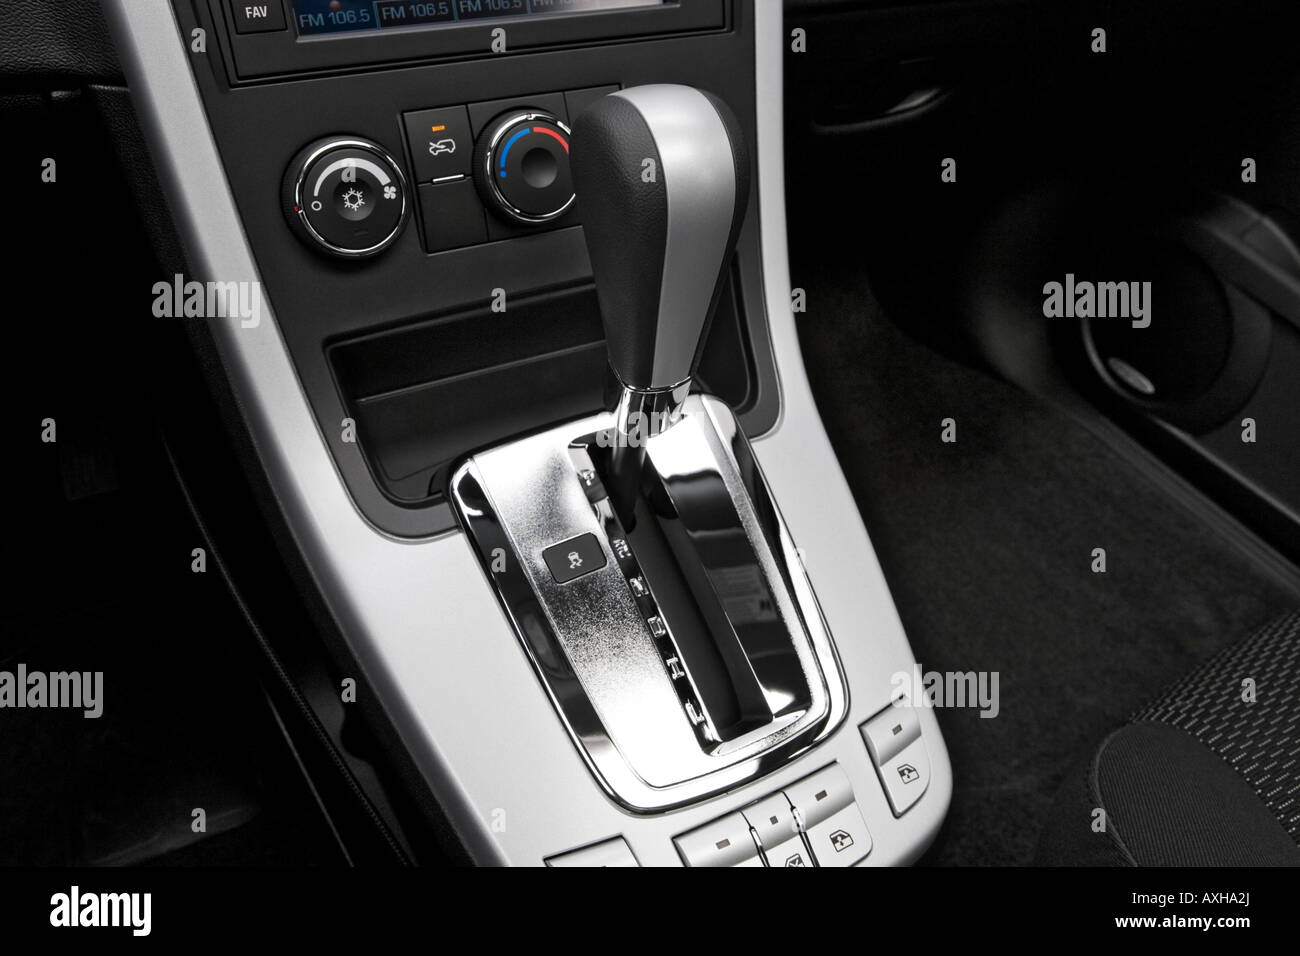 2008 Pontiac Torrent in Gray - Gear shifter/center console Stock Photo -  Alamy